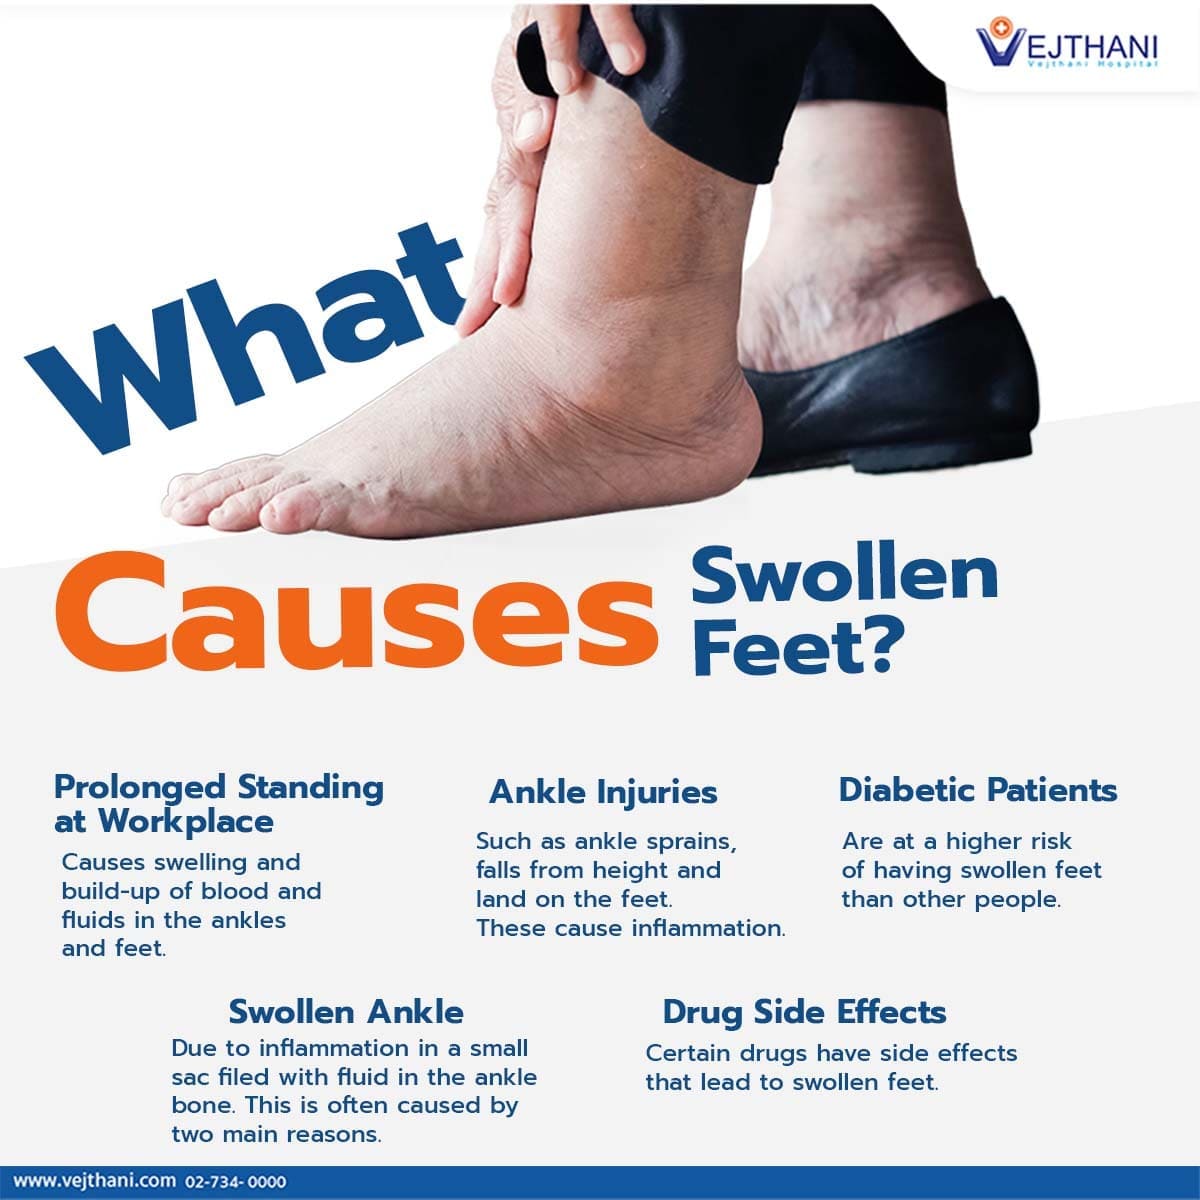 What Causes Swollen Feet Vejthani Hospital Jci Accredited